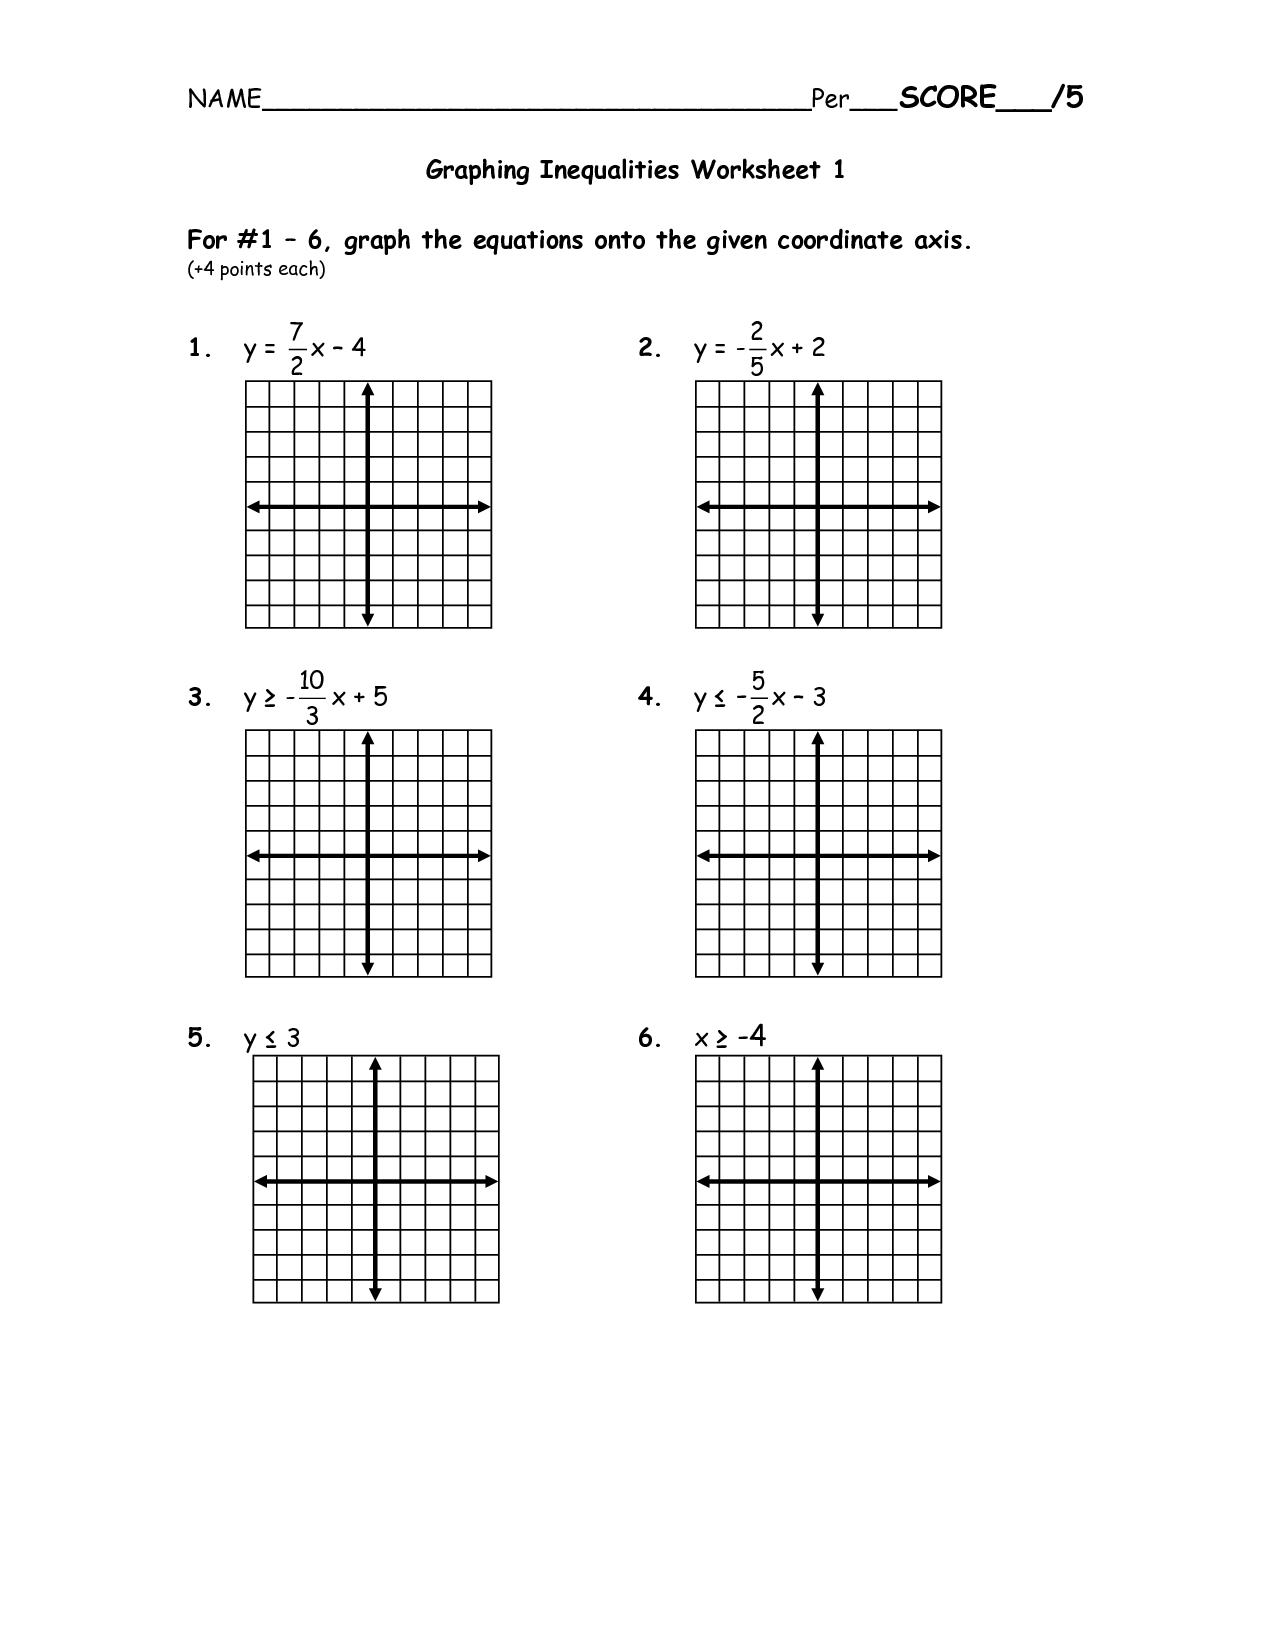 Graphing Inequality Worksheets Image